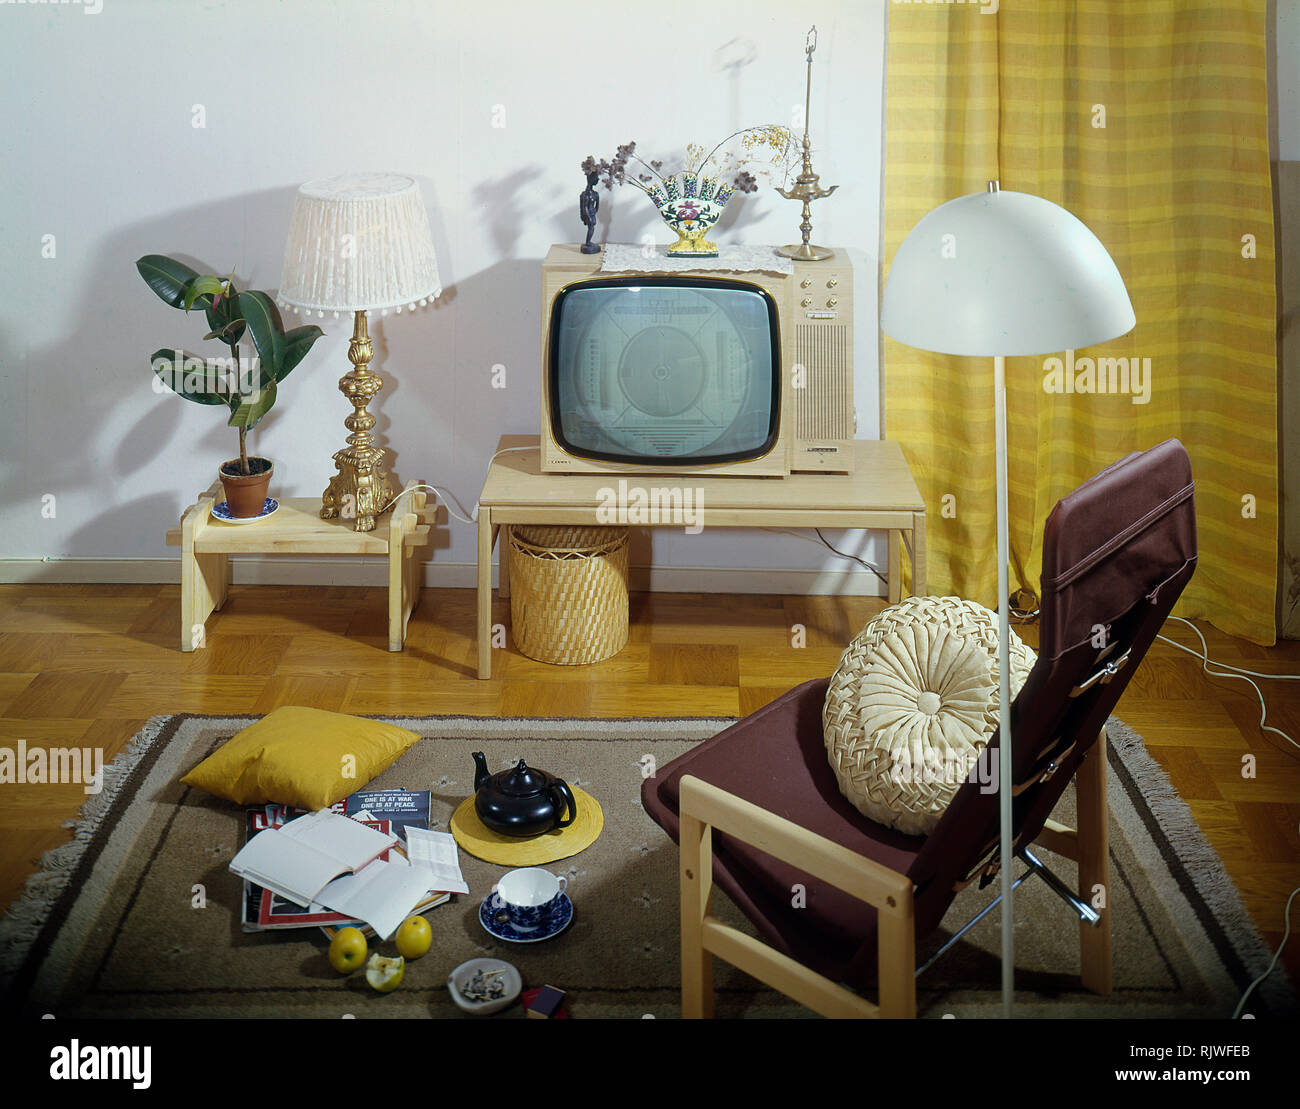 Television In The 1960s Interior From A Room With A Typical